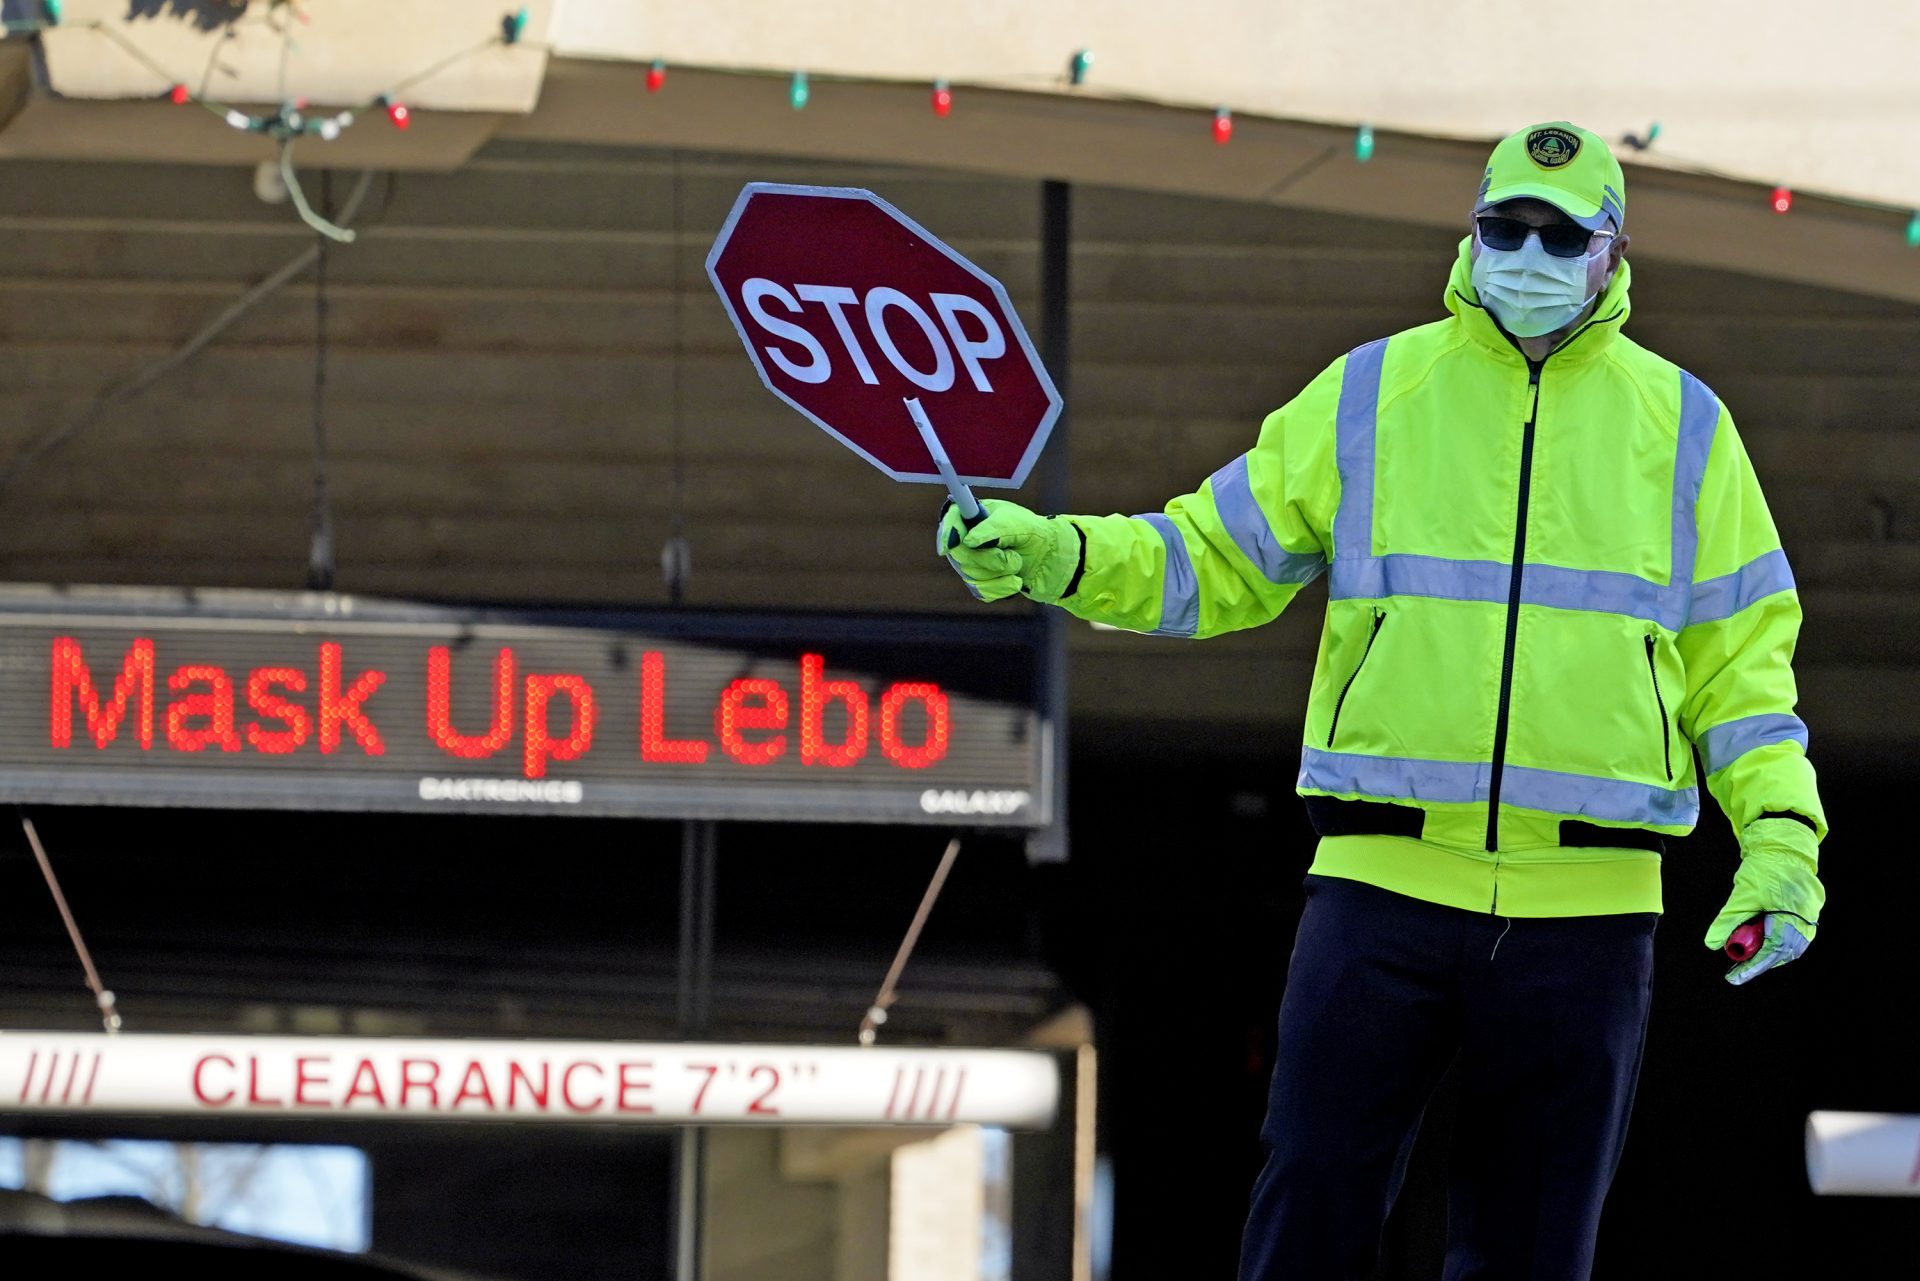 A school crossing guard works, Wednesday, Nov. 18, 2020, in Mount Lebanon, Pa., in front of a sign reminding people to wear a mask.